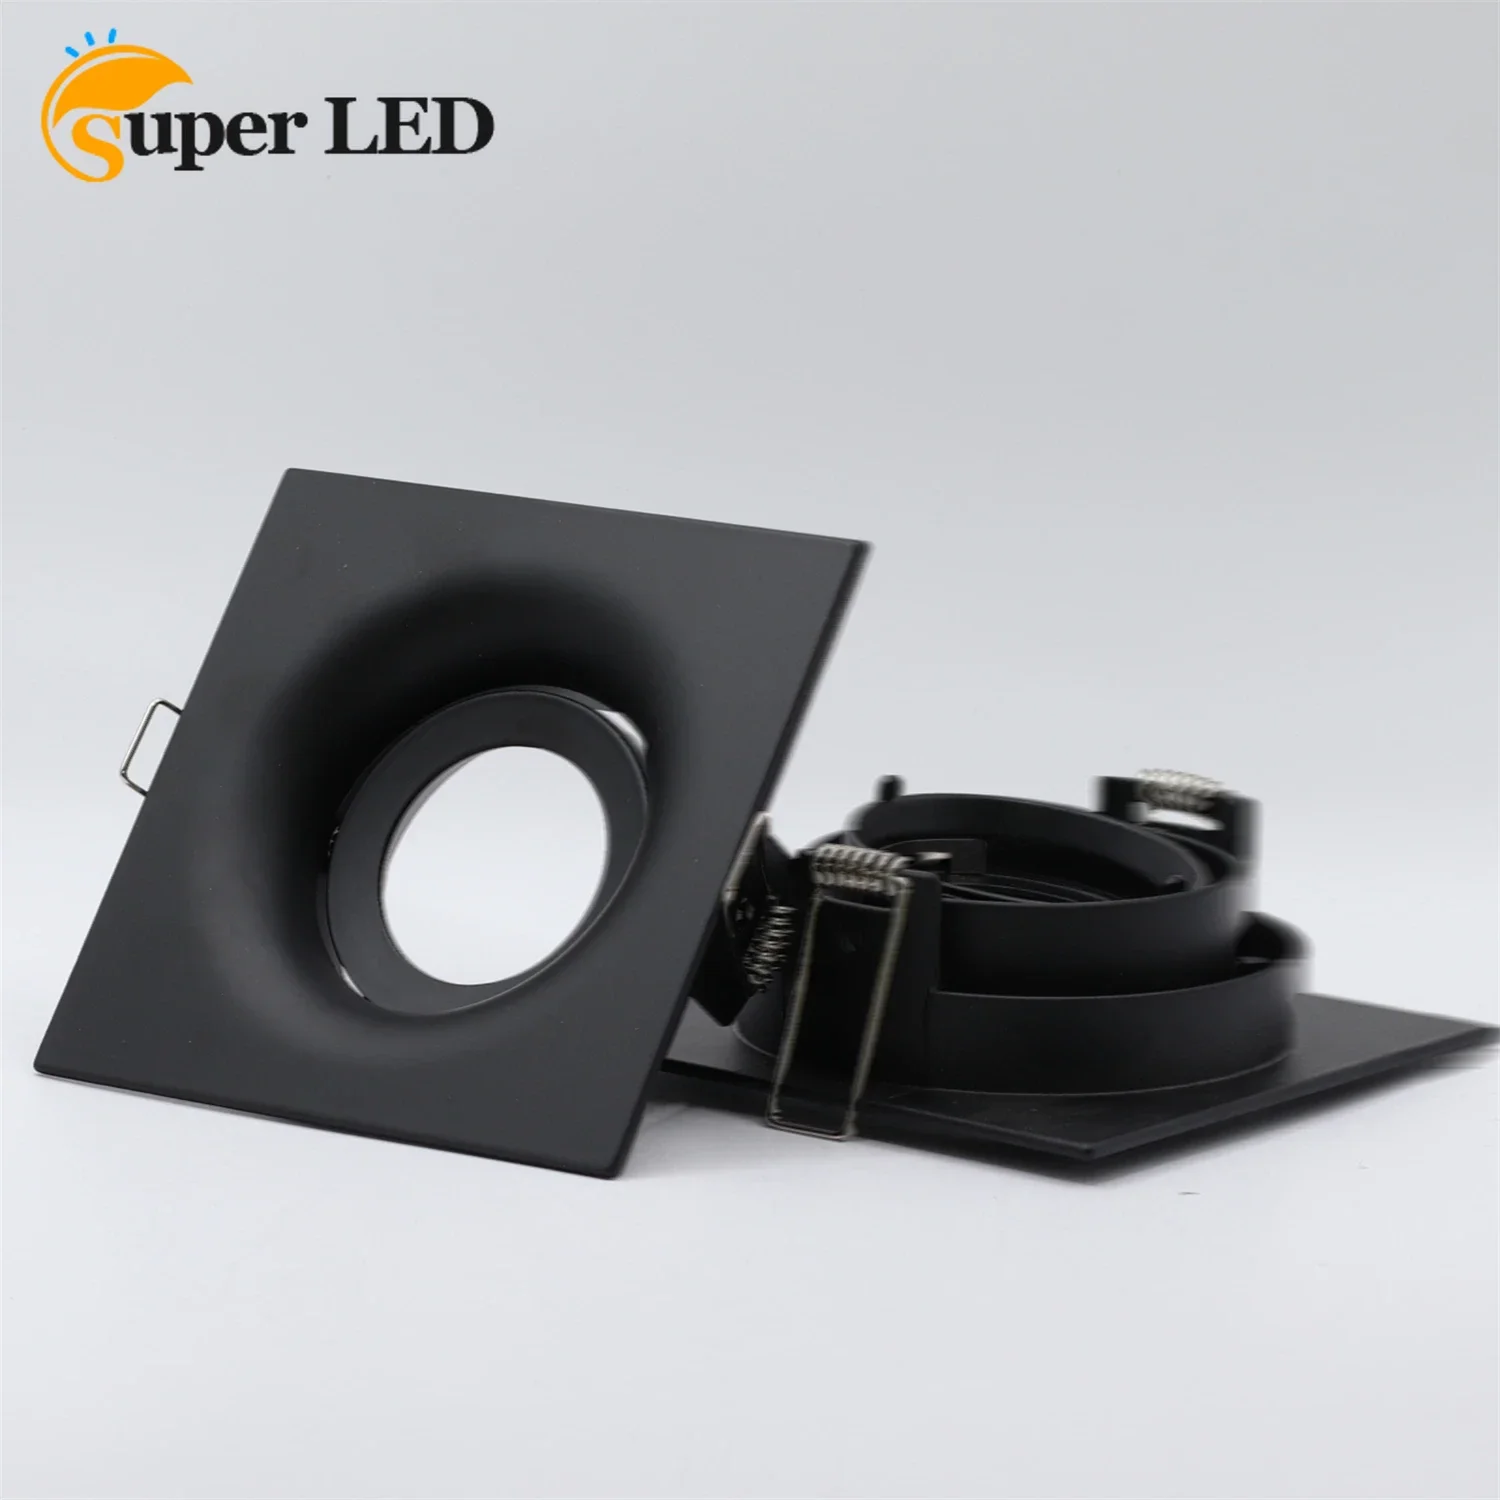 

Replaceable Light Source Spotlight Downlight Frame Bracket Shell with MR16 Holder 90mm Inch Cut Hole